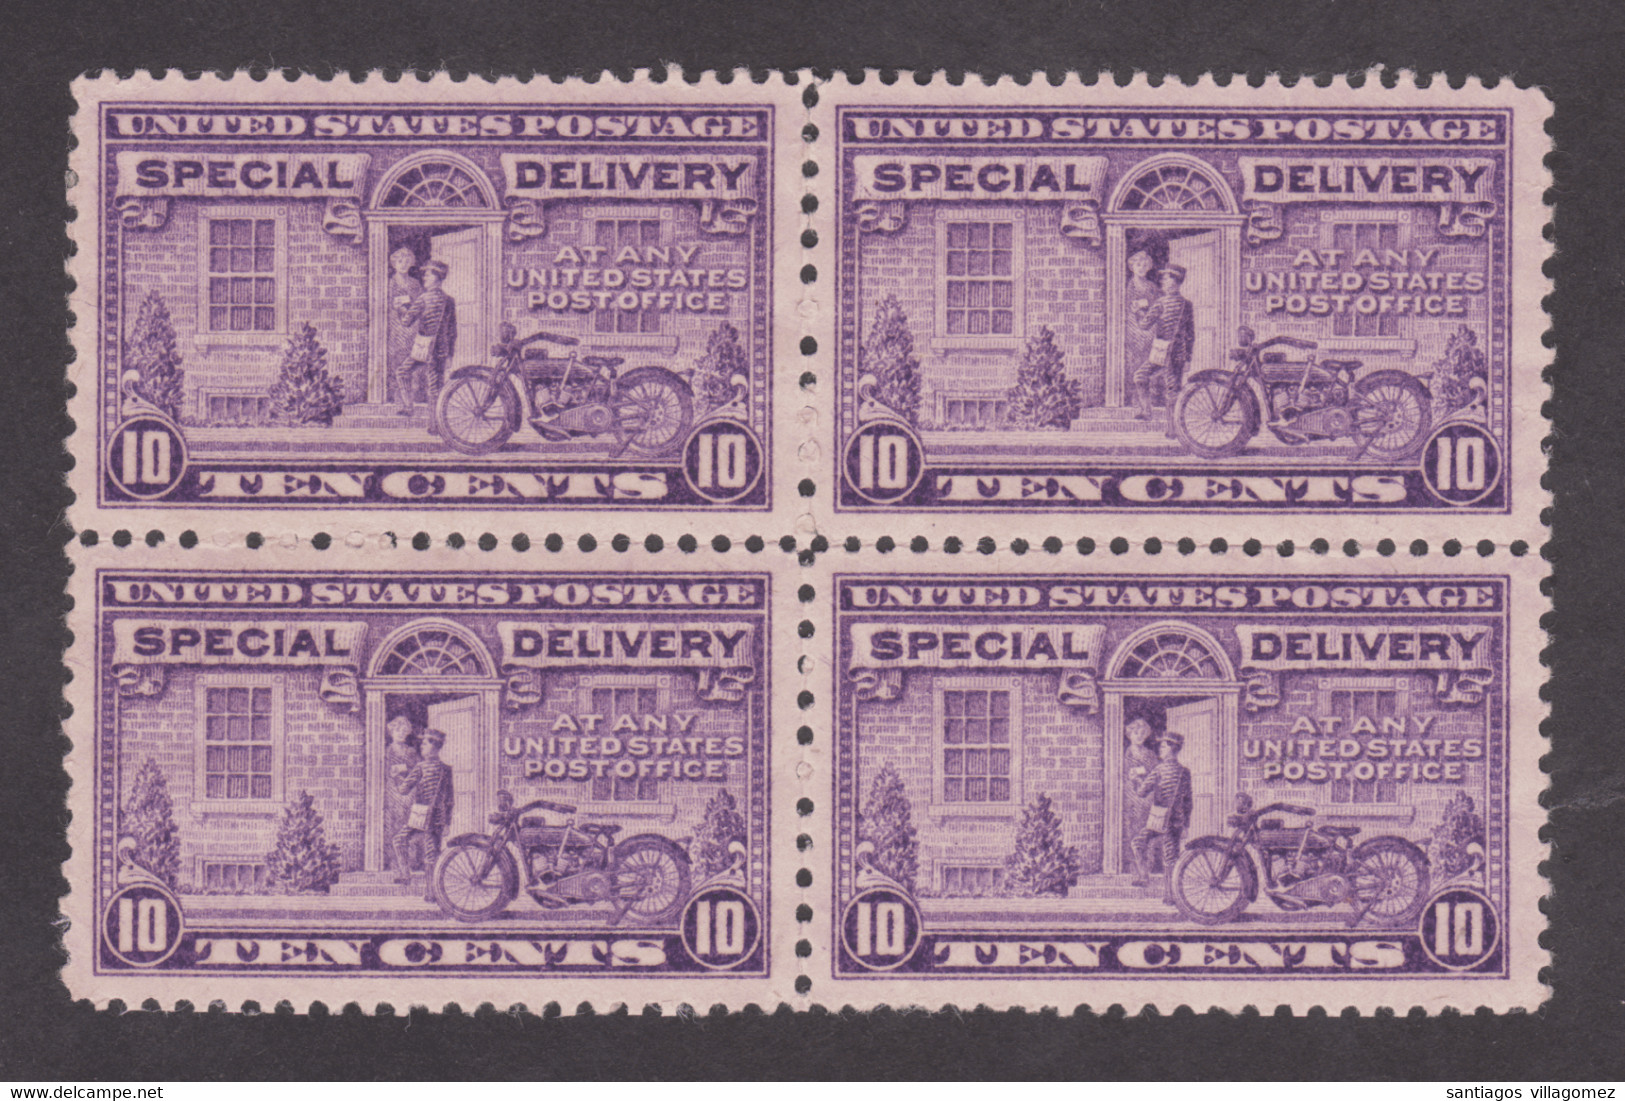 USA 1917: SPECIAL DELIVERY STAMPS Block Of 4 In Gray Violet - Unused Stamps